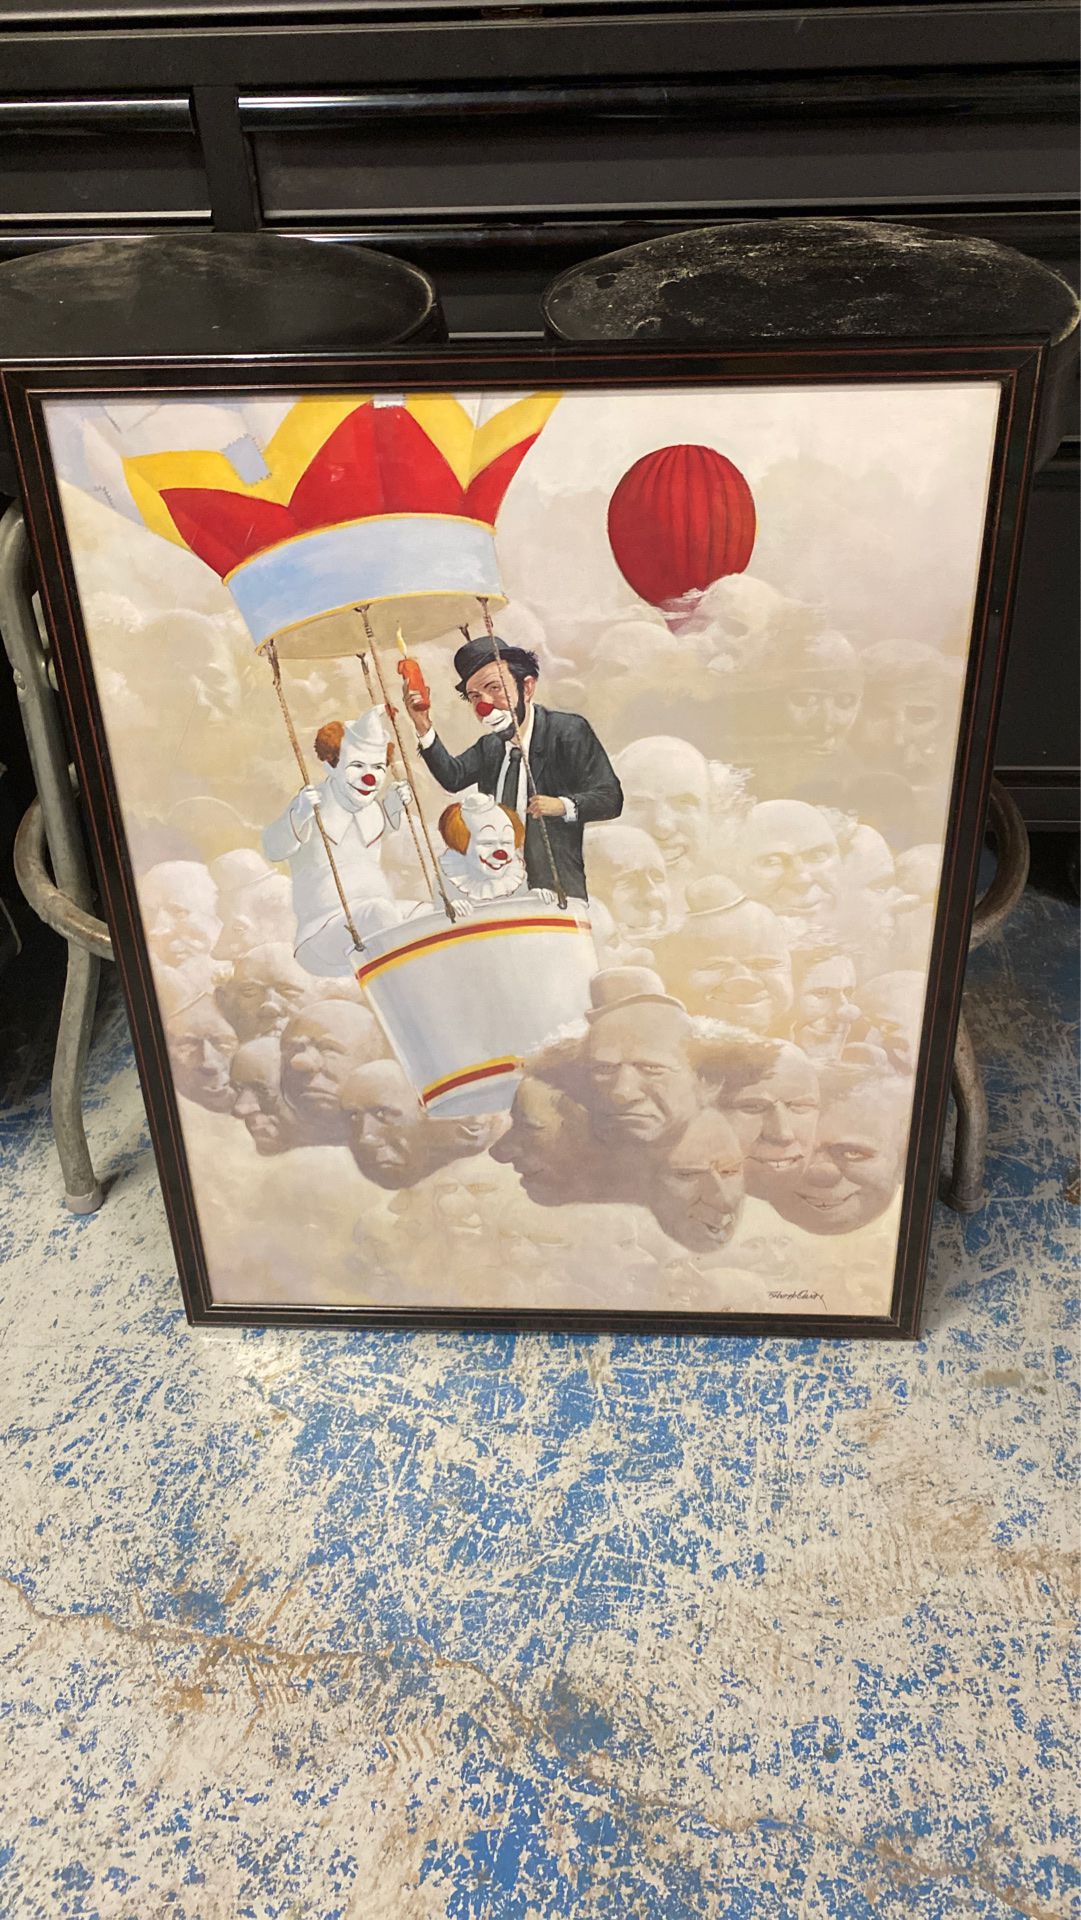 Clowns in Hot Air Balloon picture frame